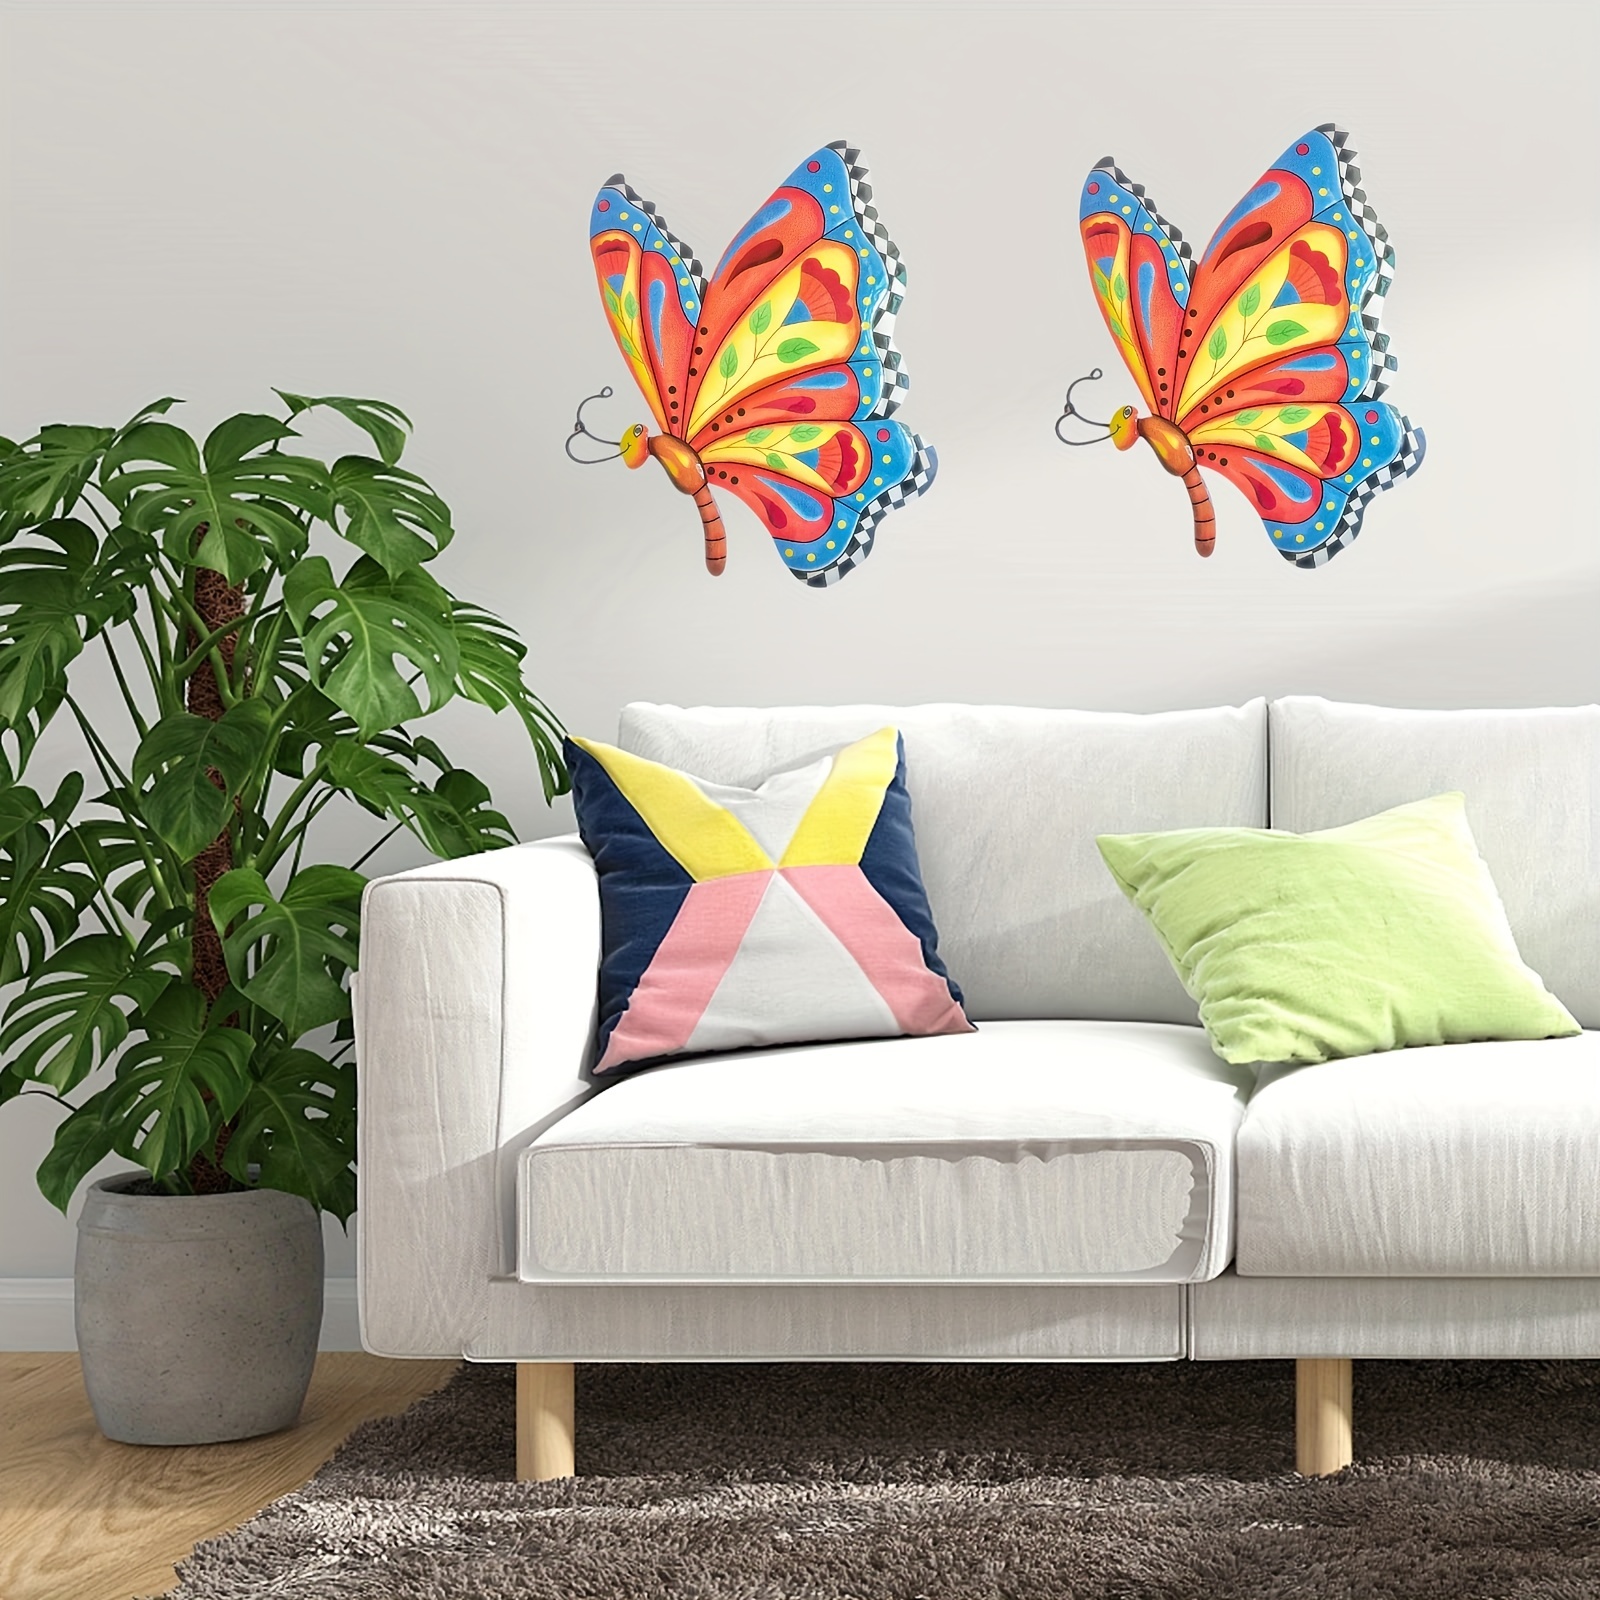 MEETYAMOR Metal Butterfly Outdoor Wall Decor, Colorful Islamic Small 3d  Butterflies Wall Sculptures Art, Fence Spring Decorations for Patio Outside Garden  Wall Front Porch Room Bedroom Backyard : Buy Online at Best